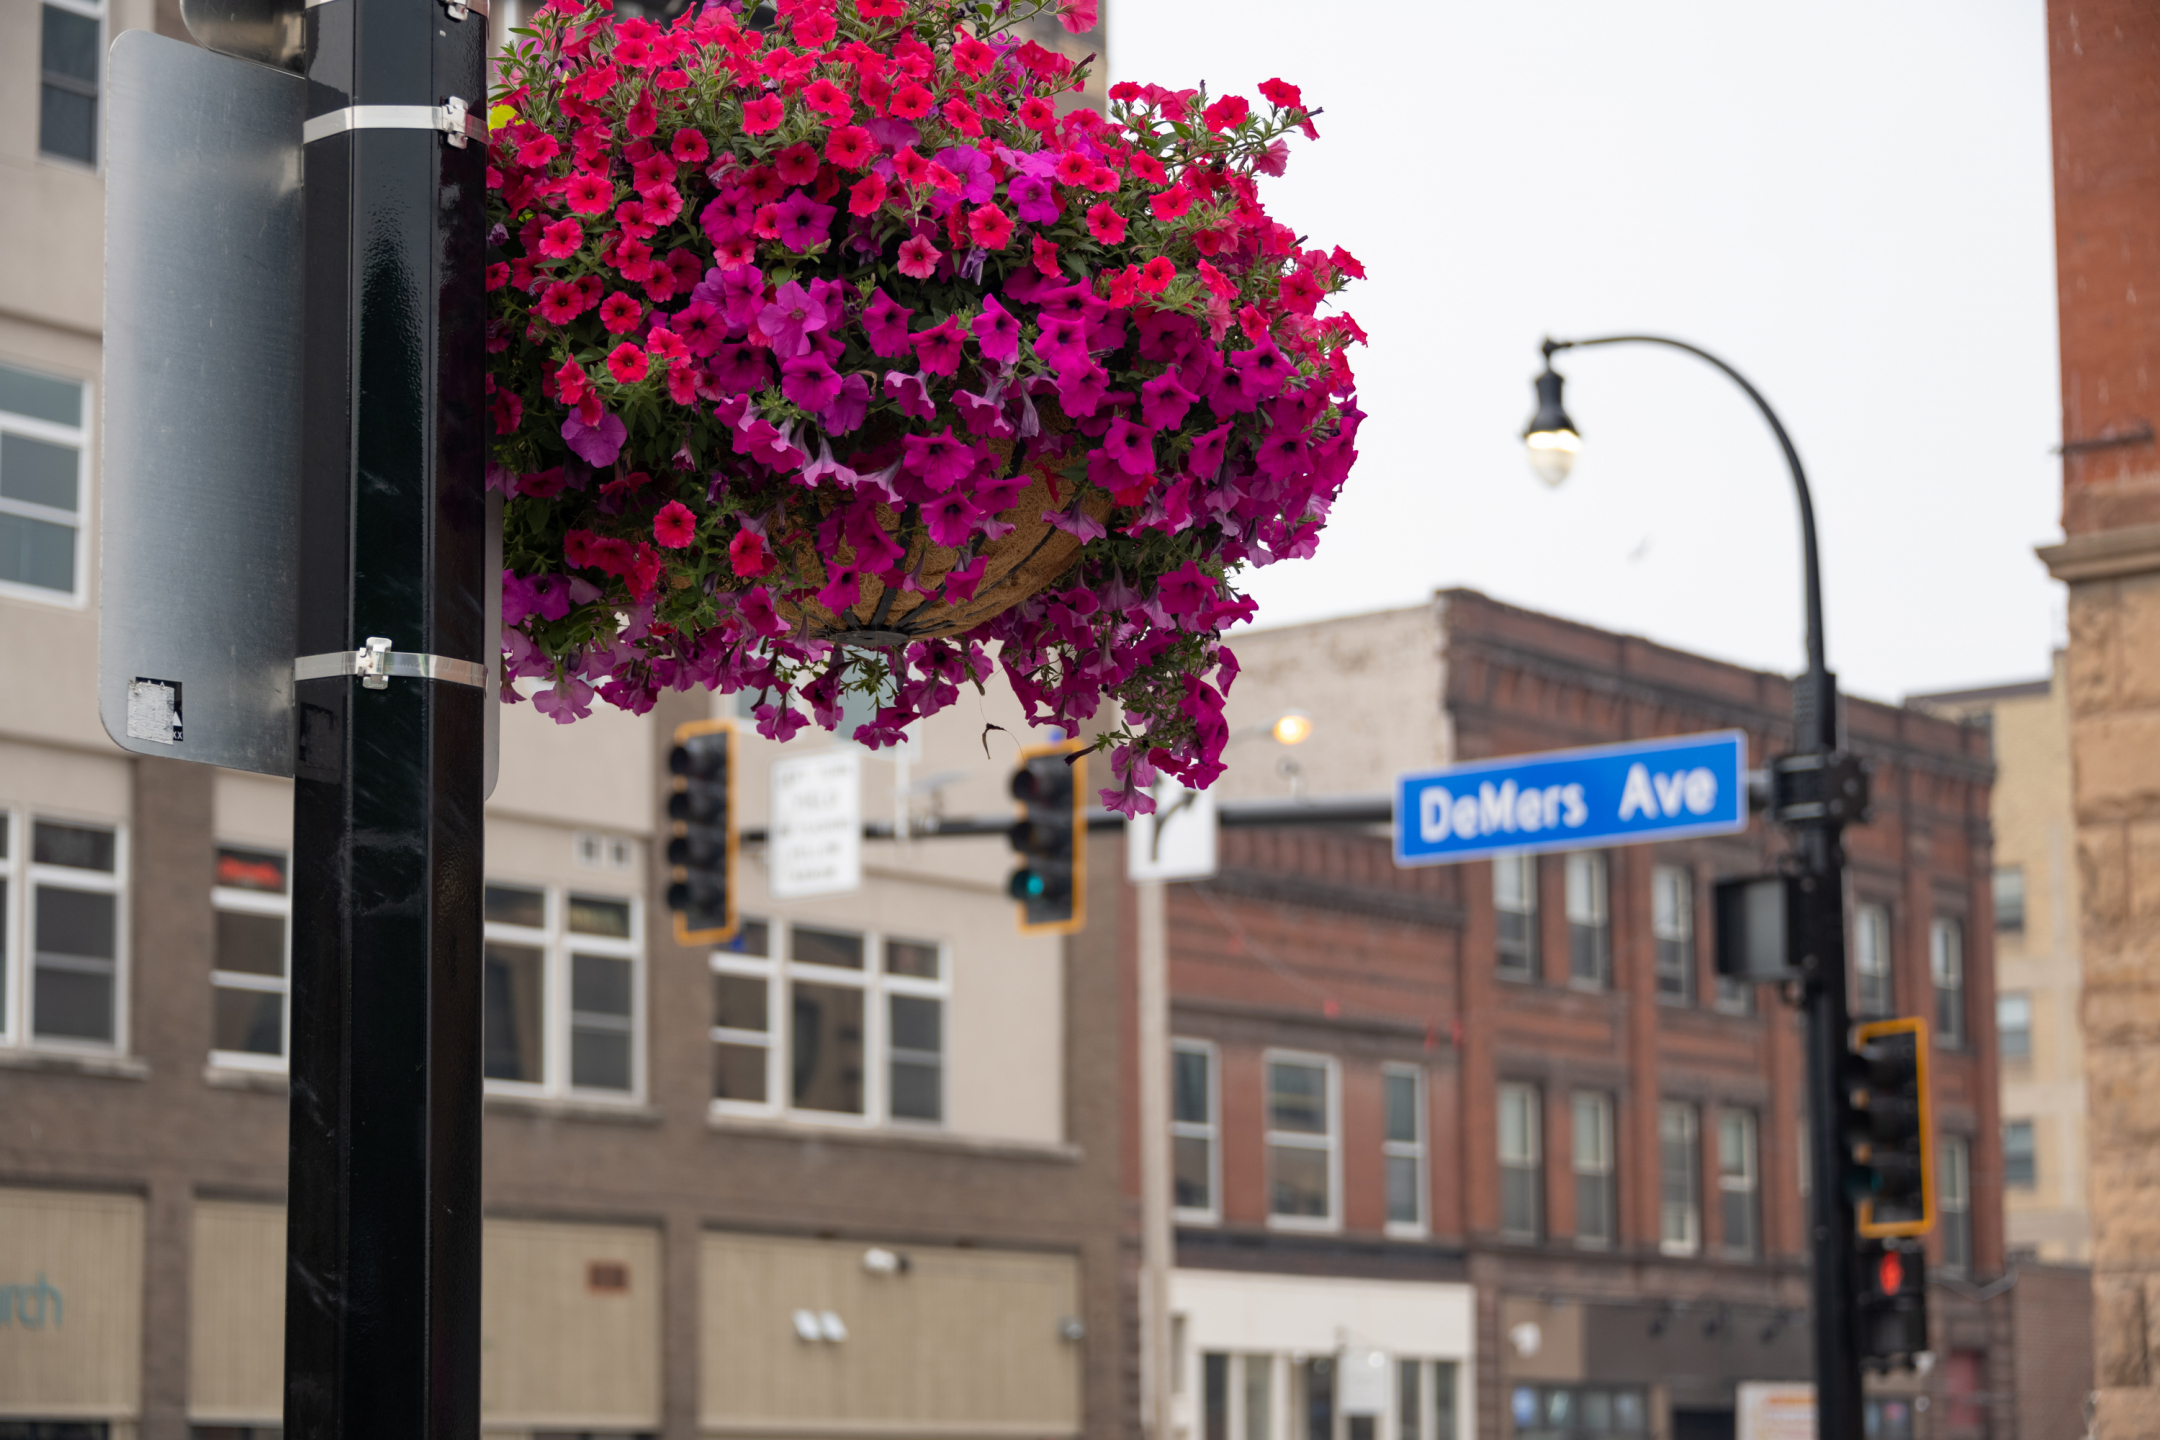 a colorful flowering plant decorates a light pole along a town road